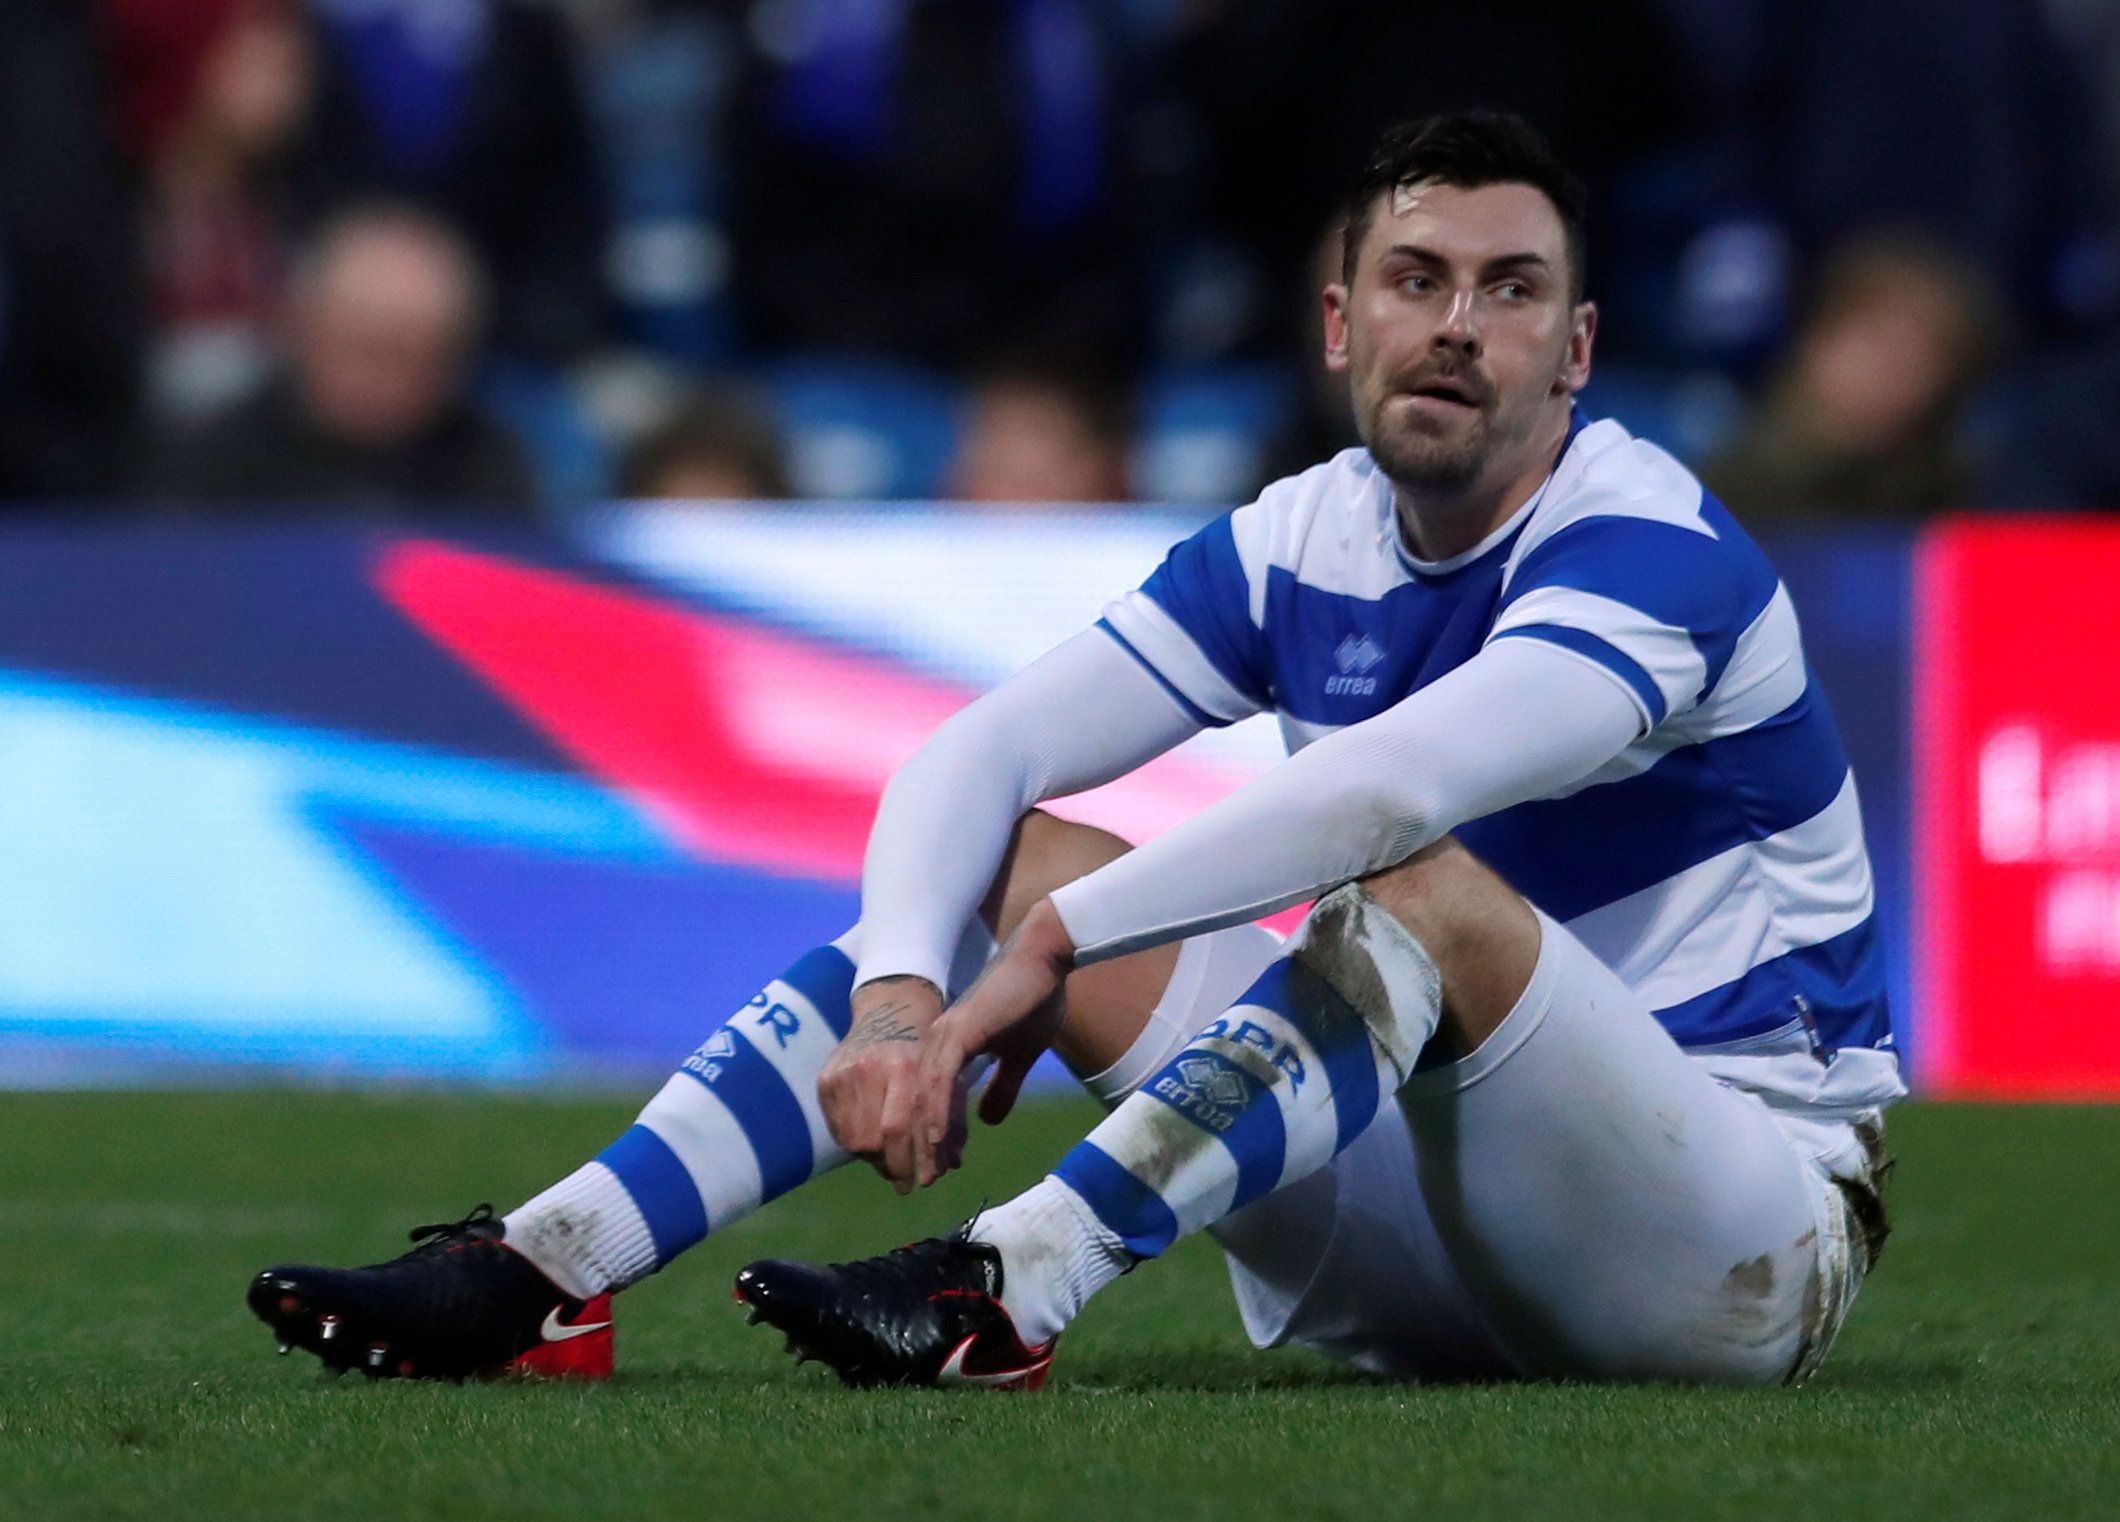 Soccer Football - FA Cup Third Round - Queens Park Rangers vs Milton Keynes Dons - Loftus Road, London, Britain - January 6, 2018   Queens Park Rangers' Grant Hall looks dejected after MK Dons first goal   Action Images/Andrew Couldridge